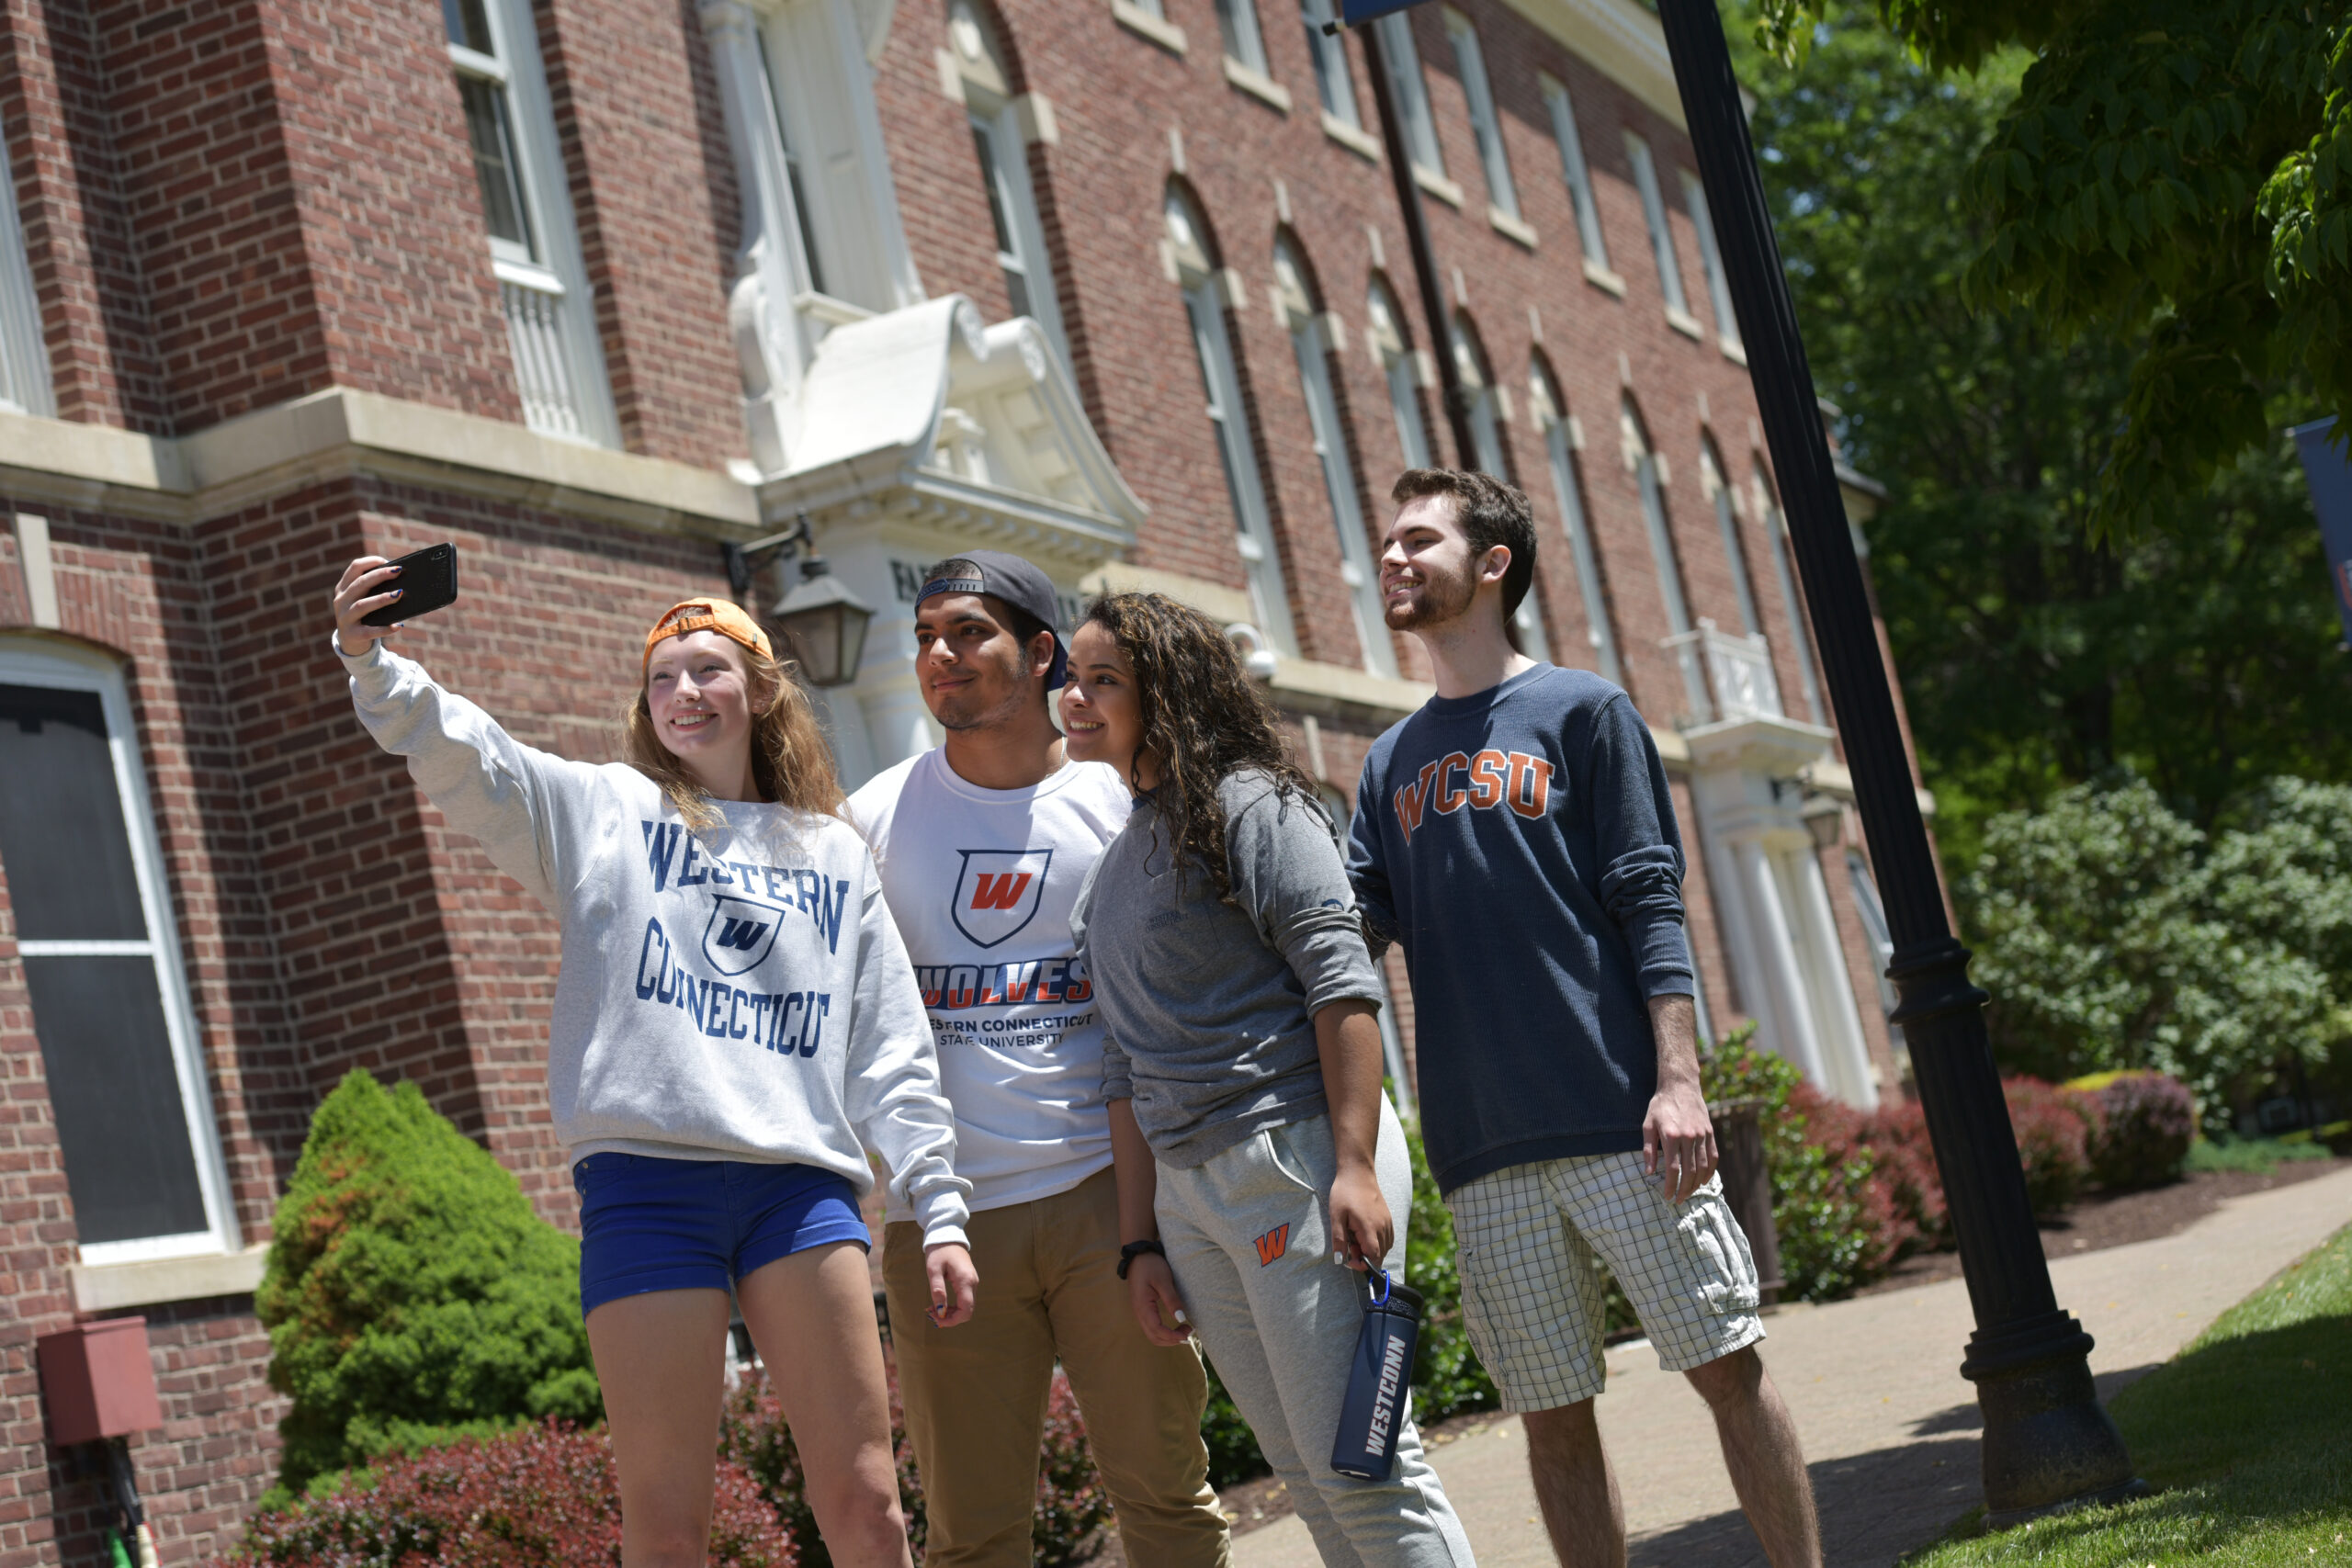 Four students taking a selfie in front of a campus building. All students are wearing Western CT state clothing.